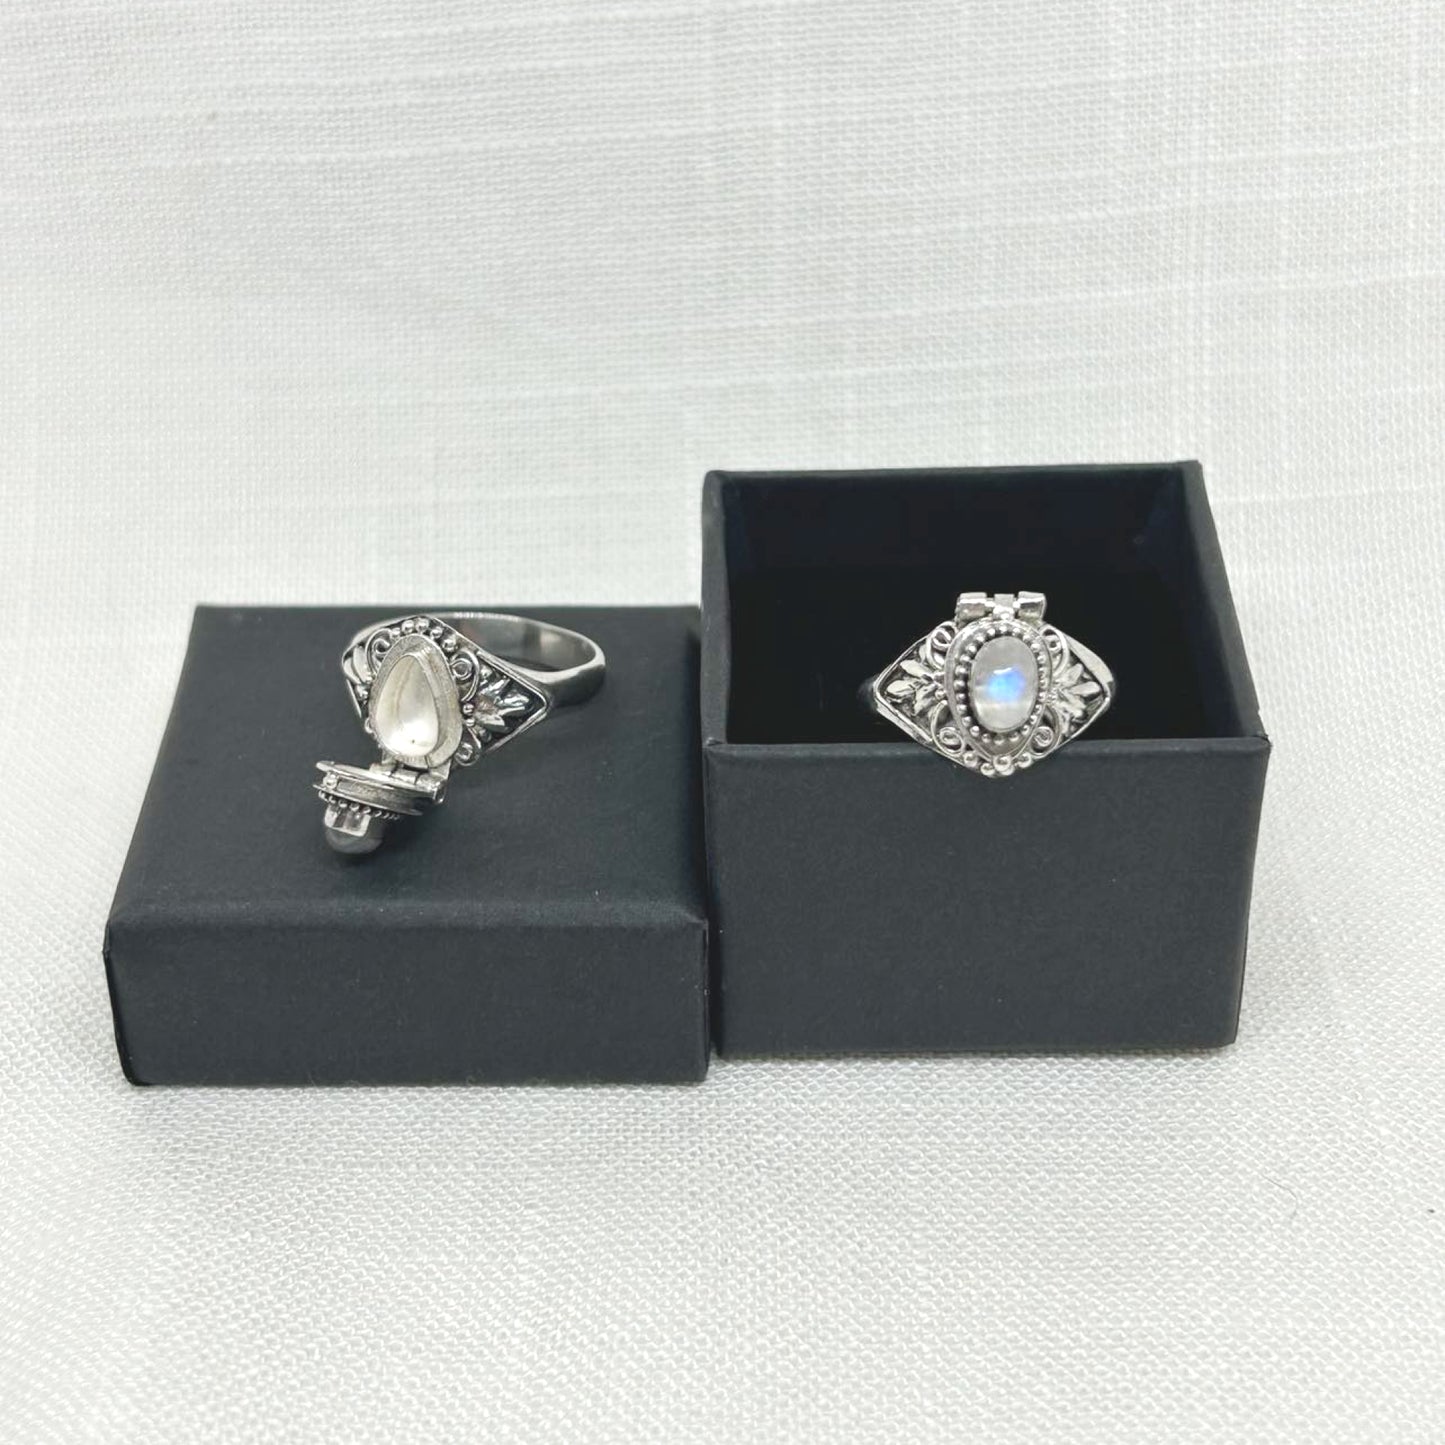 A beautifully patterned hand made poison ring with an oval Rainbow Moonstone sitting on the top. The crystal is approx 7mm long by 5mm wide. Total length of the ring is approx 15mm. The hidden box sits on top of the ring with a functioning lid to hold small objects or the old days, a small amount of poison. All jewellery comes gift boxed.